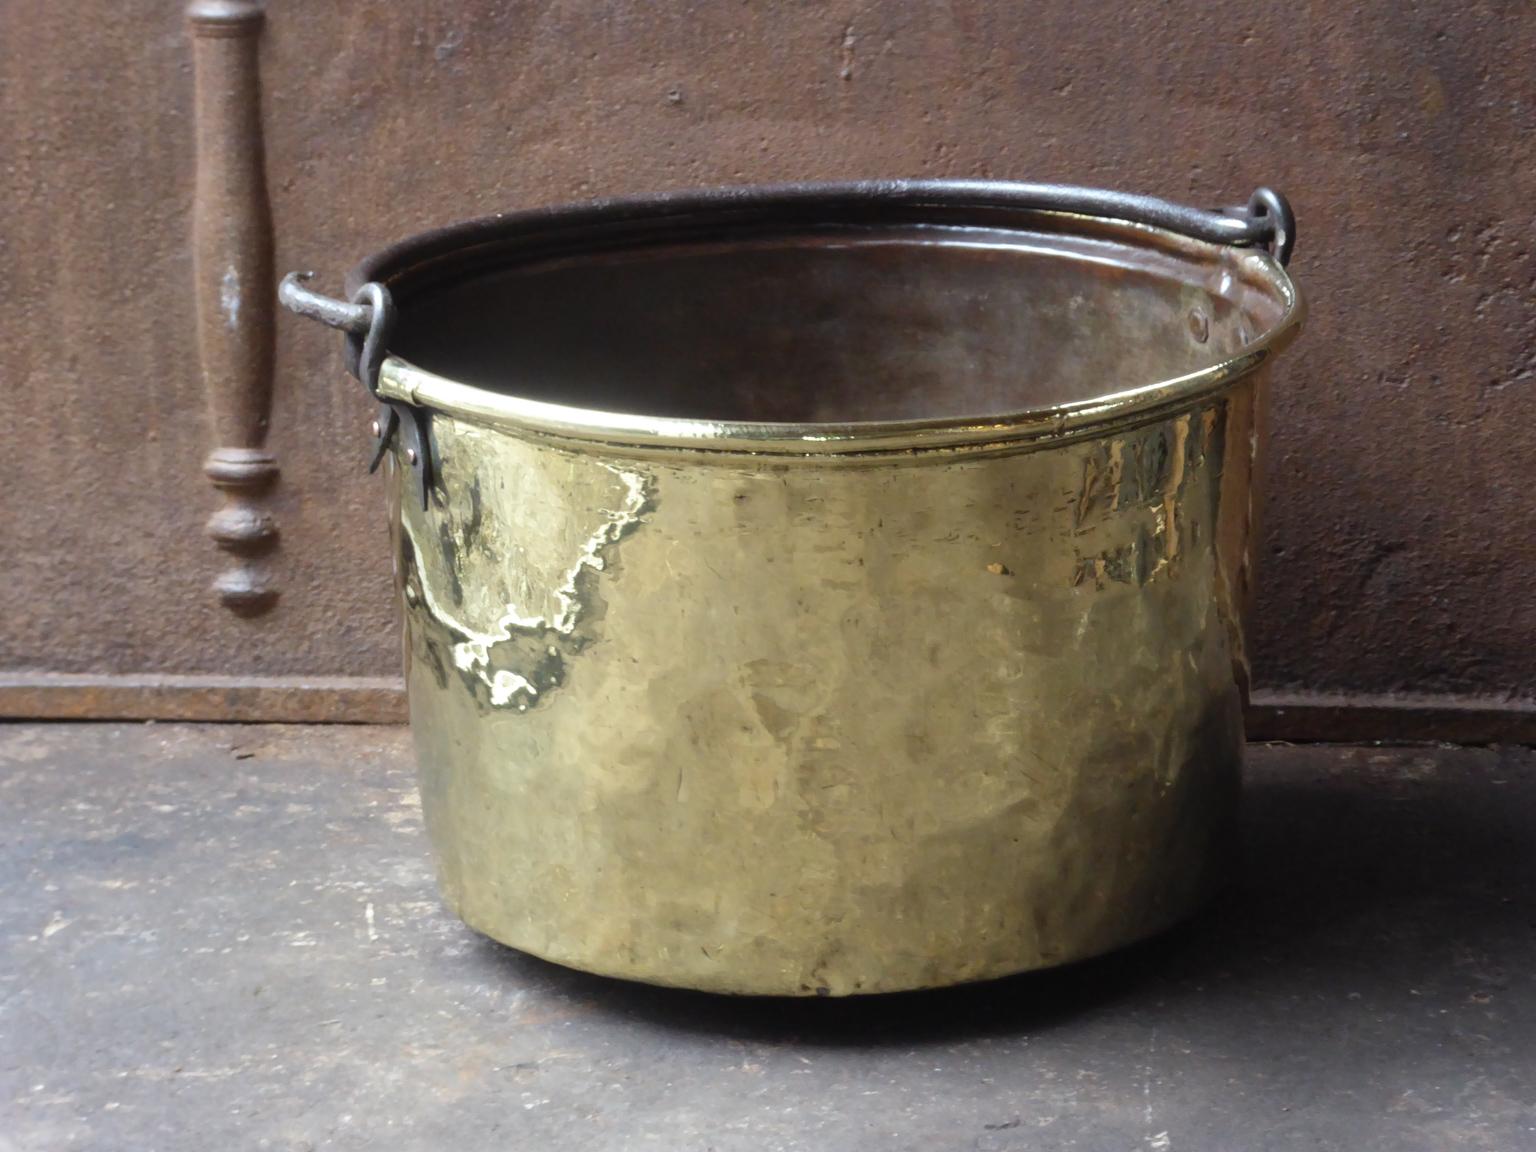 18th century Dutch Louis XV log basket. The firewood basket is made of polished brass and has a wrought iron handle. Also called 'aker'. Used to draw water from the well and cook over an open fire.

The log holder is in a good condition and is